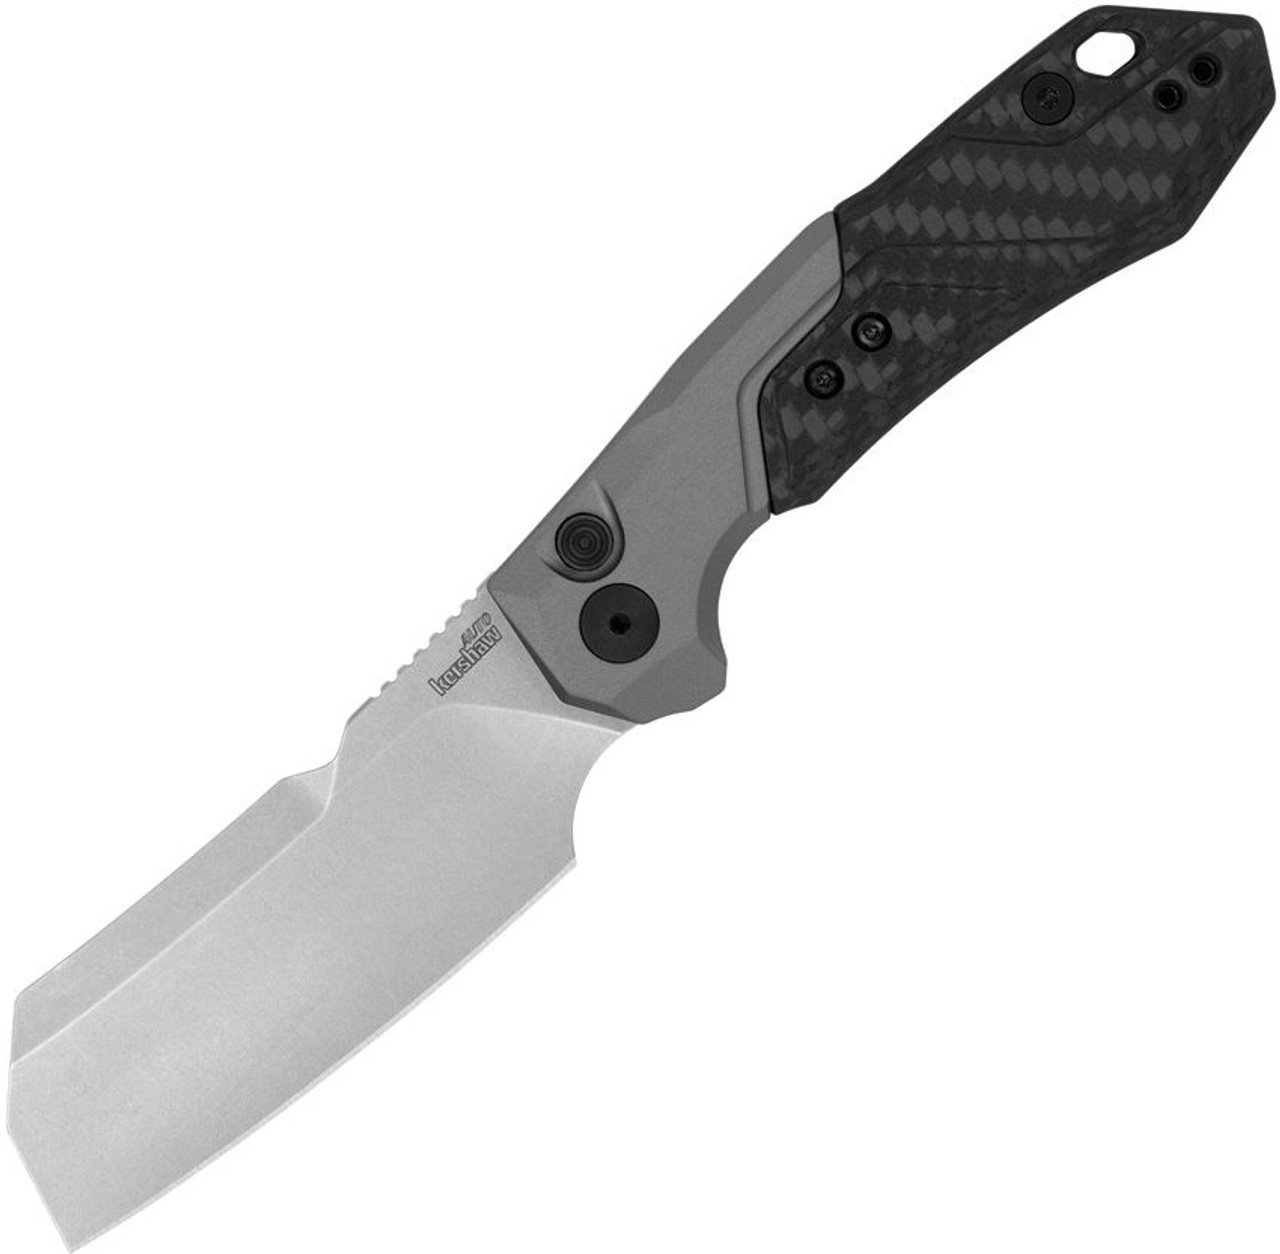 Kershaw Launch 14 Automatic Knife (7850SW)- 3.375" Stonewashed CPM-154 Cleaver Blade, Black Aluminum w/ Carbon Fiber Inlay Handle